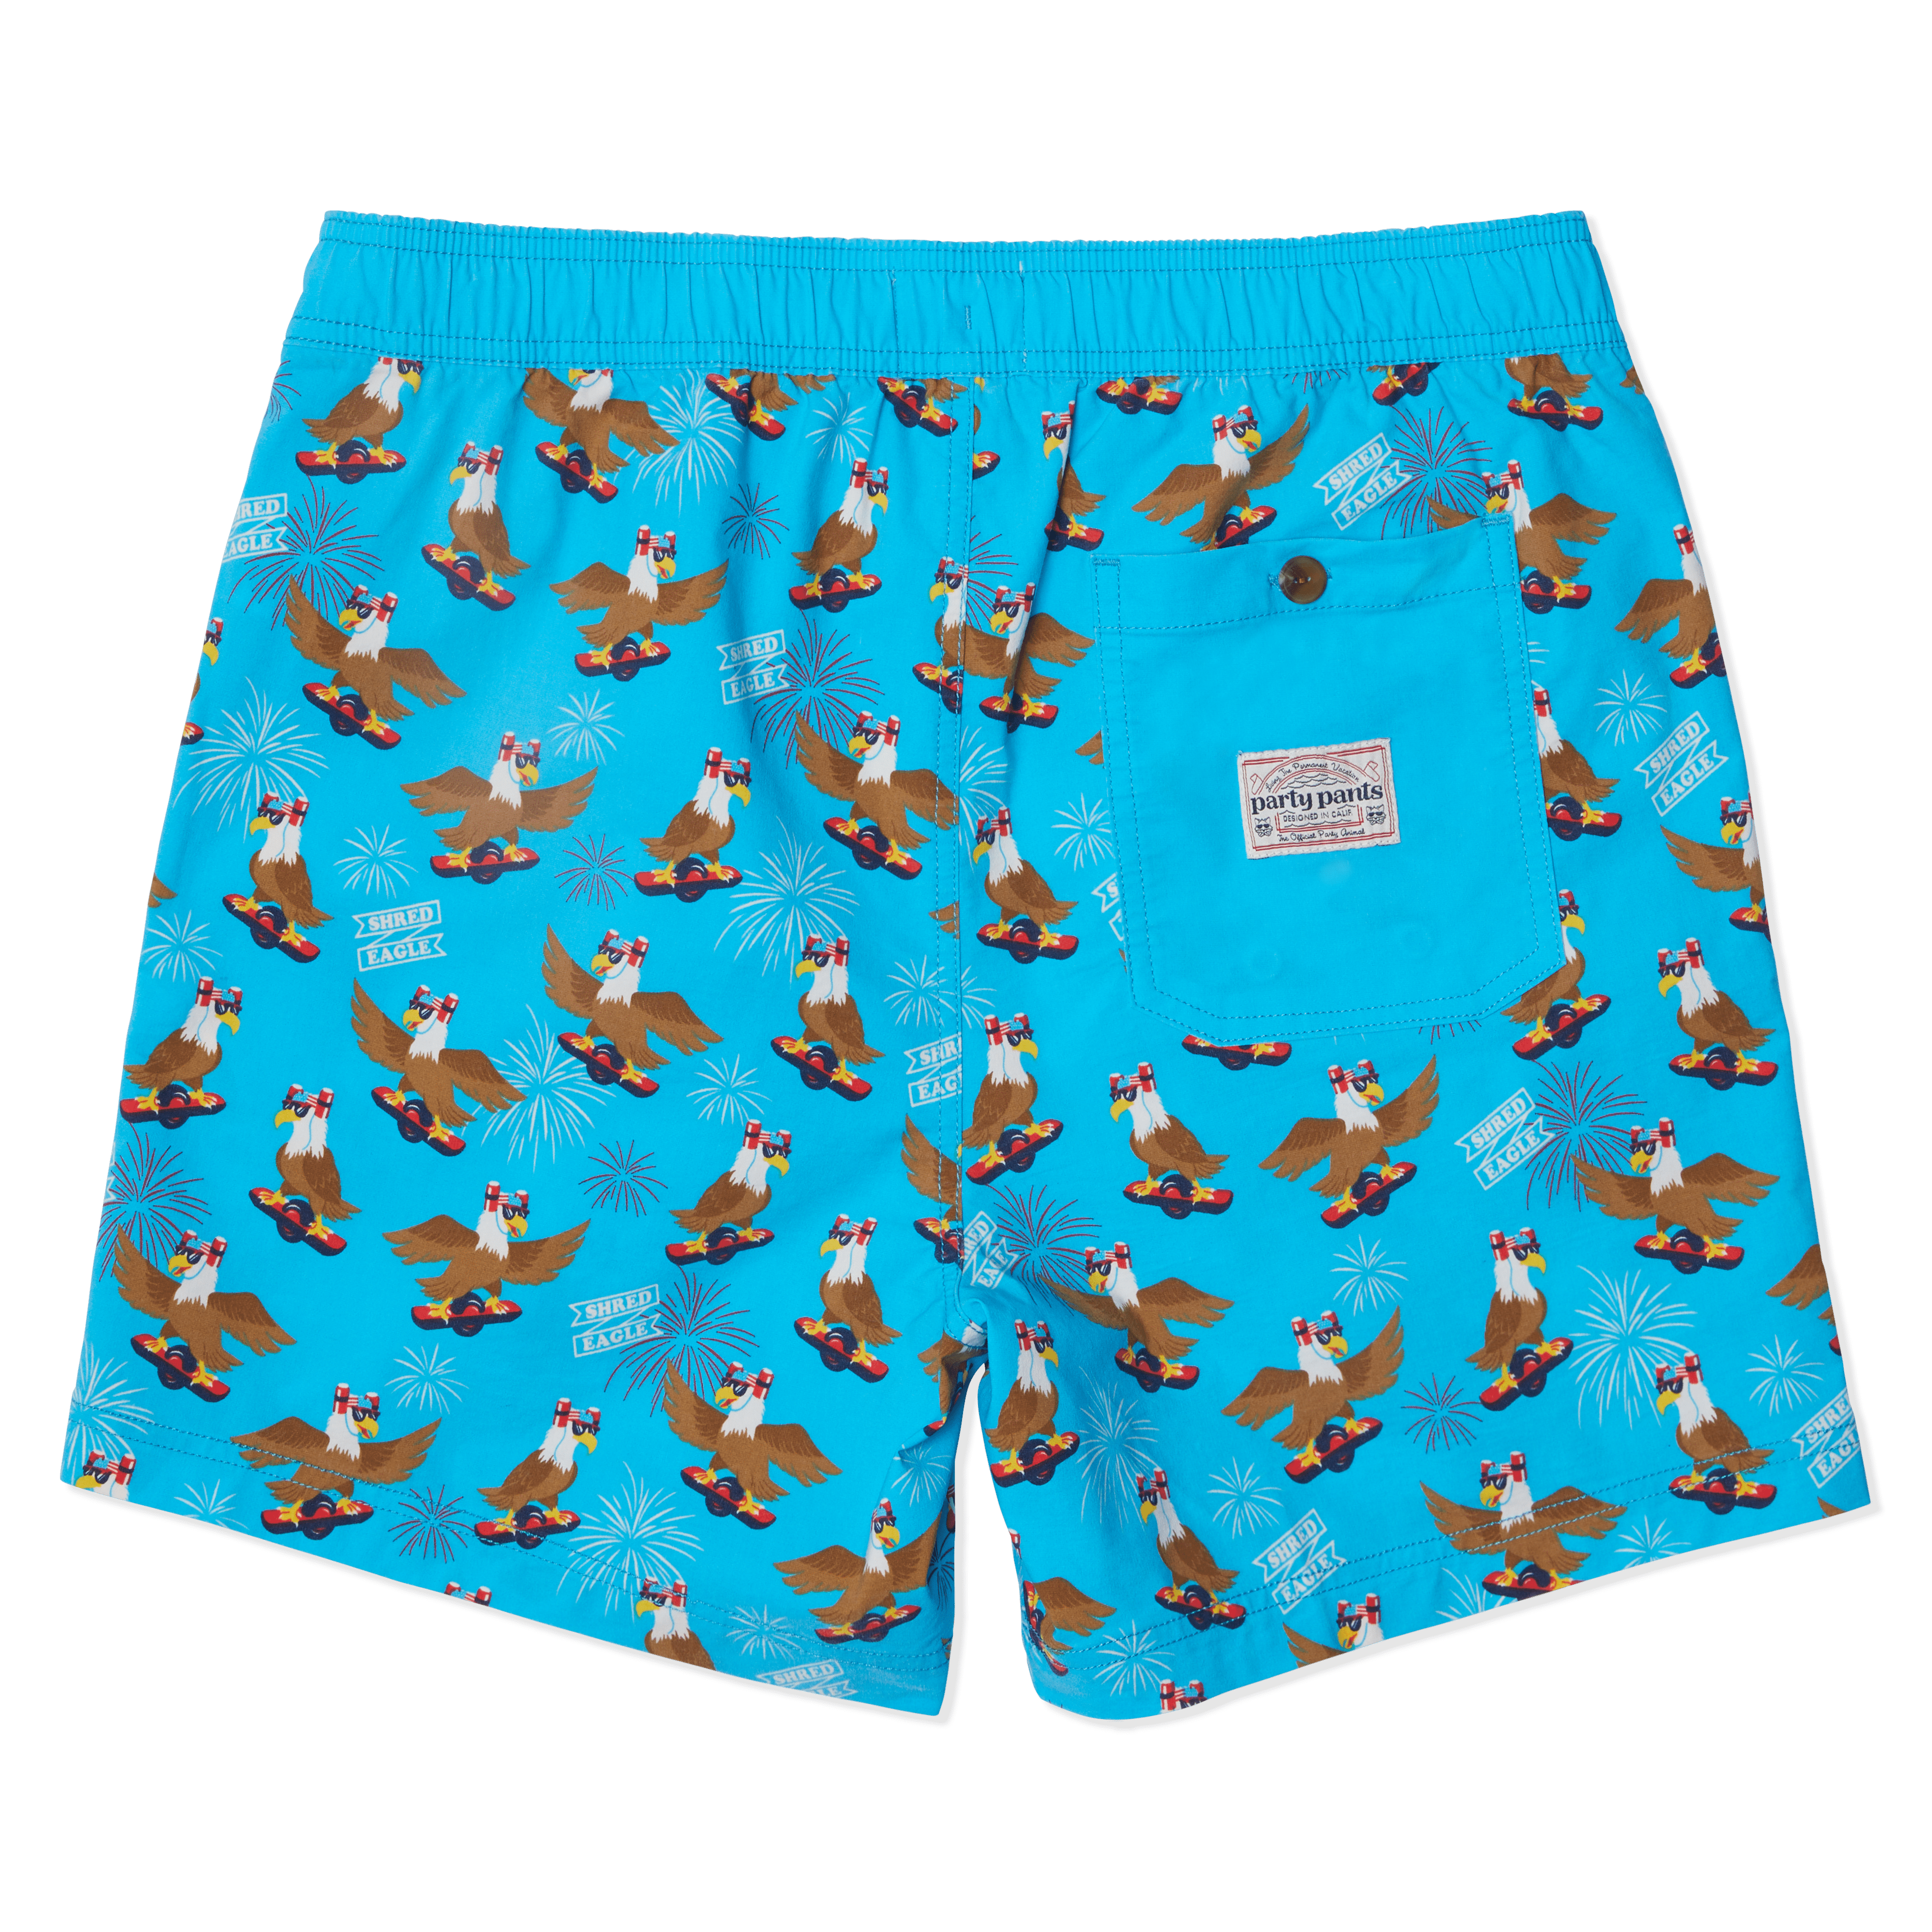 SHRED EAGLE PARTY STARTER SHORT - BLUE PARTY STARTER SHORTS PARTY PANTS 